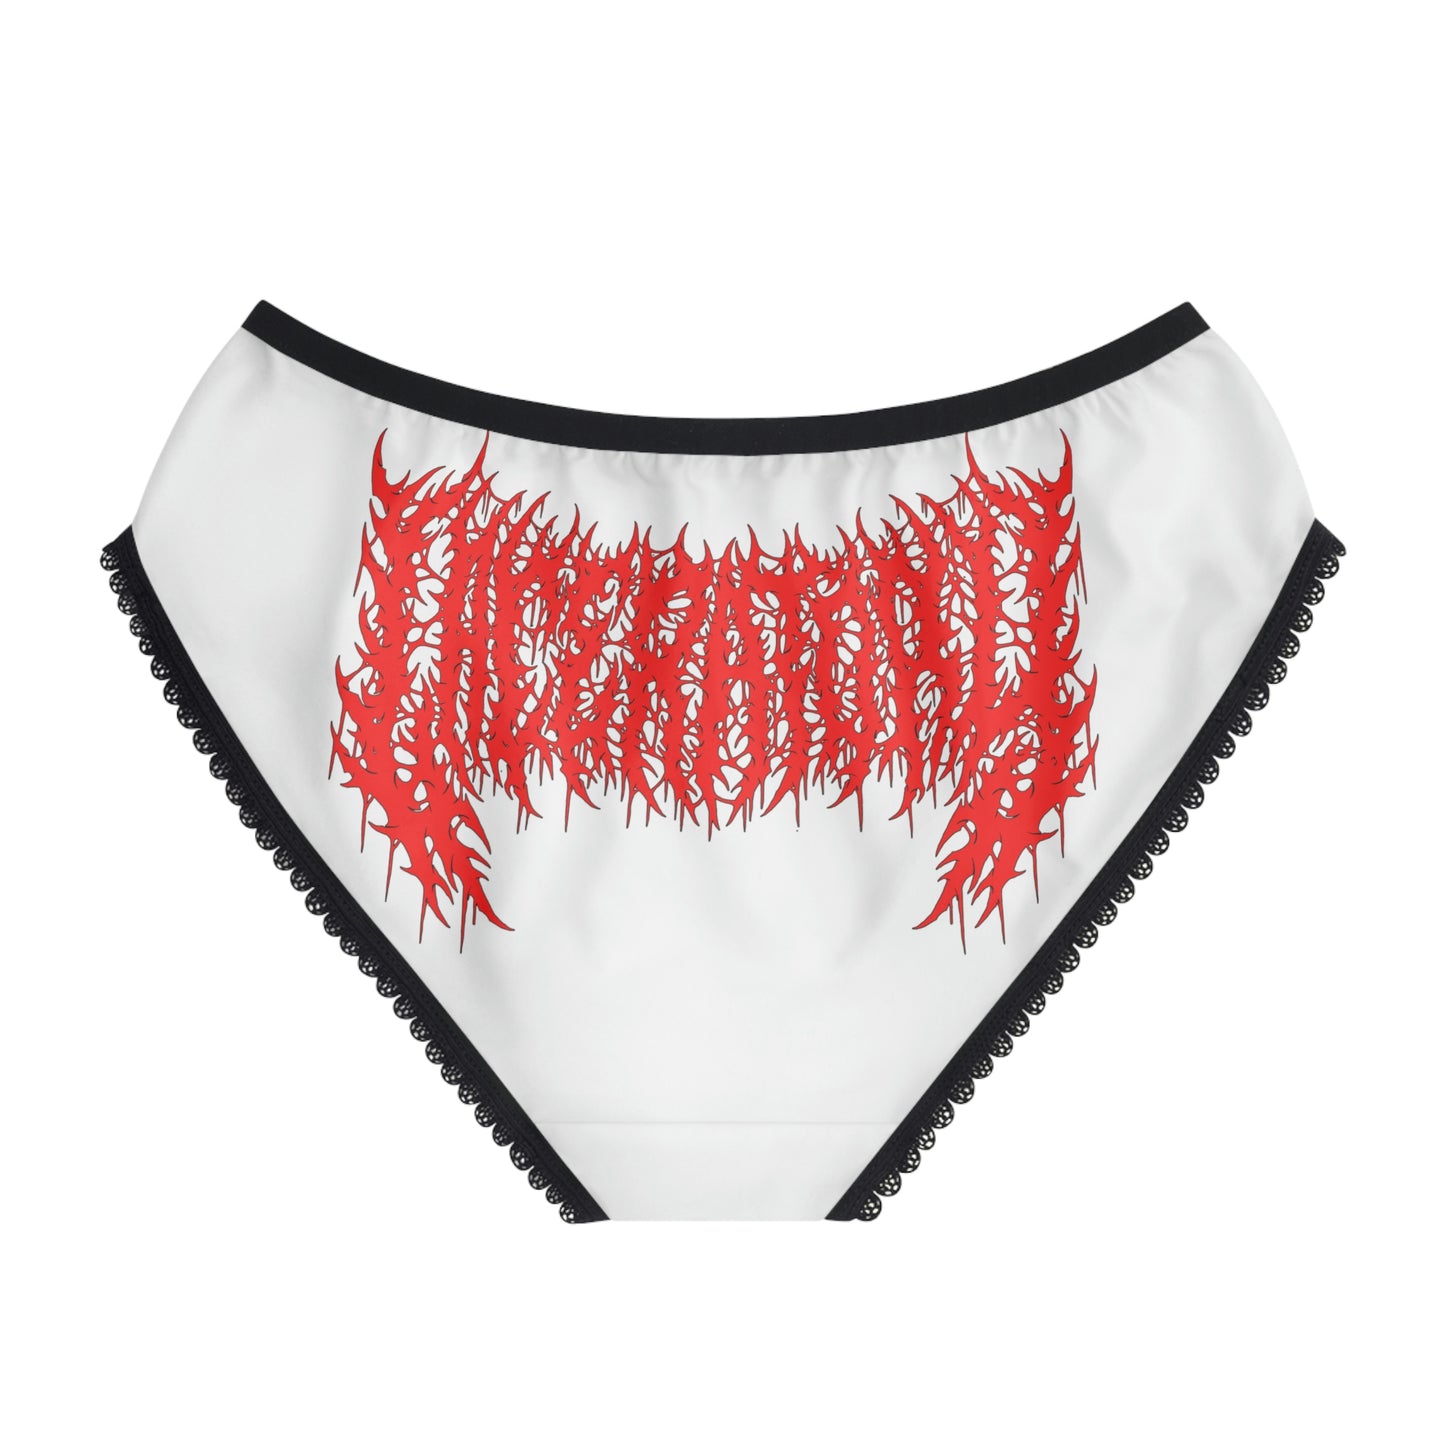 Laceratory - Women's Briefs (Asia)